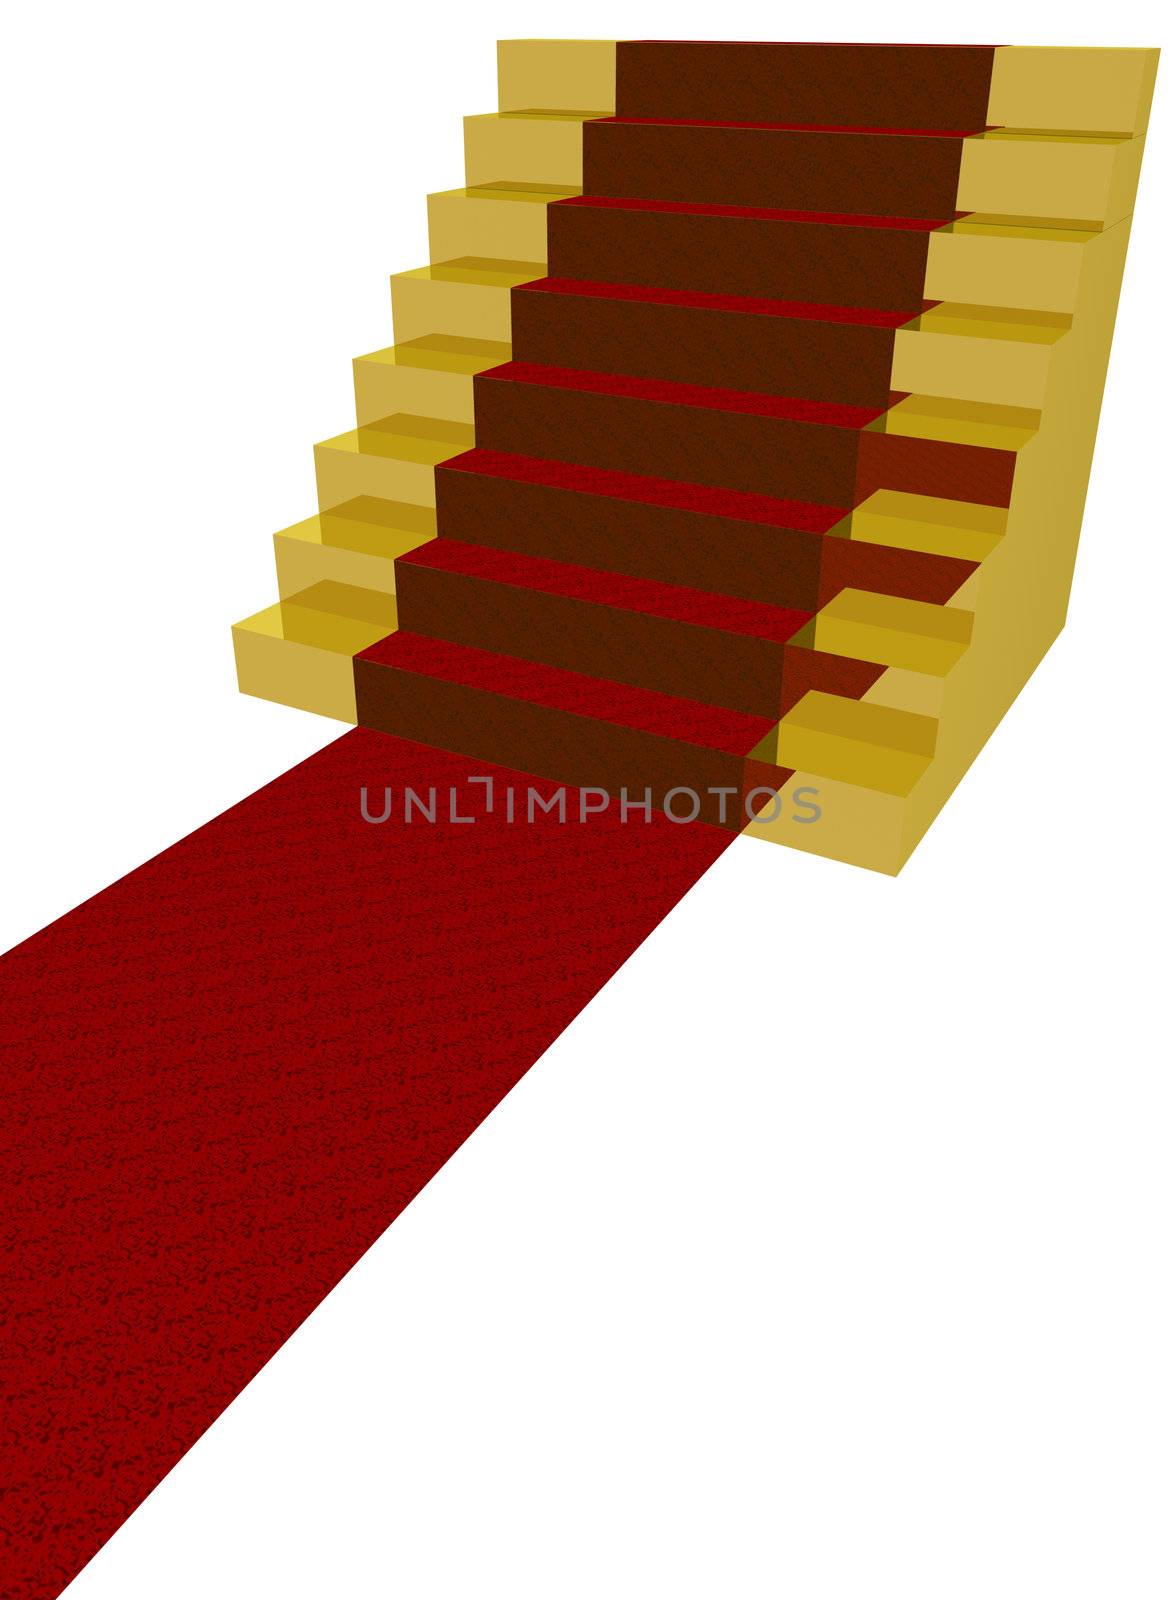 Golden stairs with red carpet. This image is a 3D render.